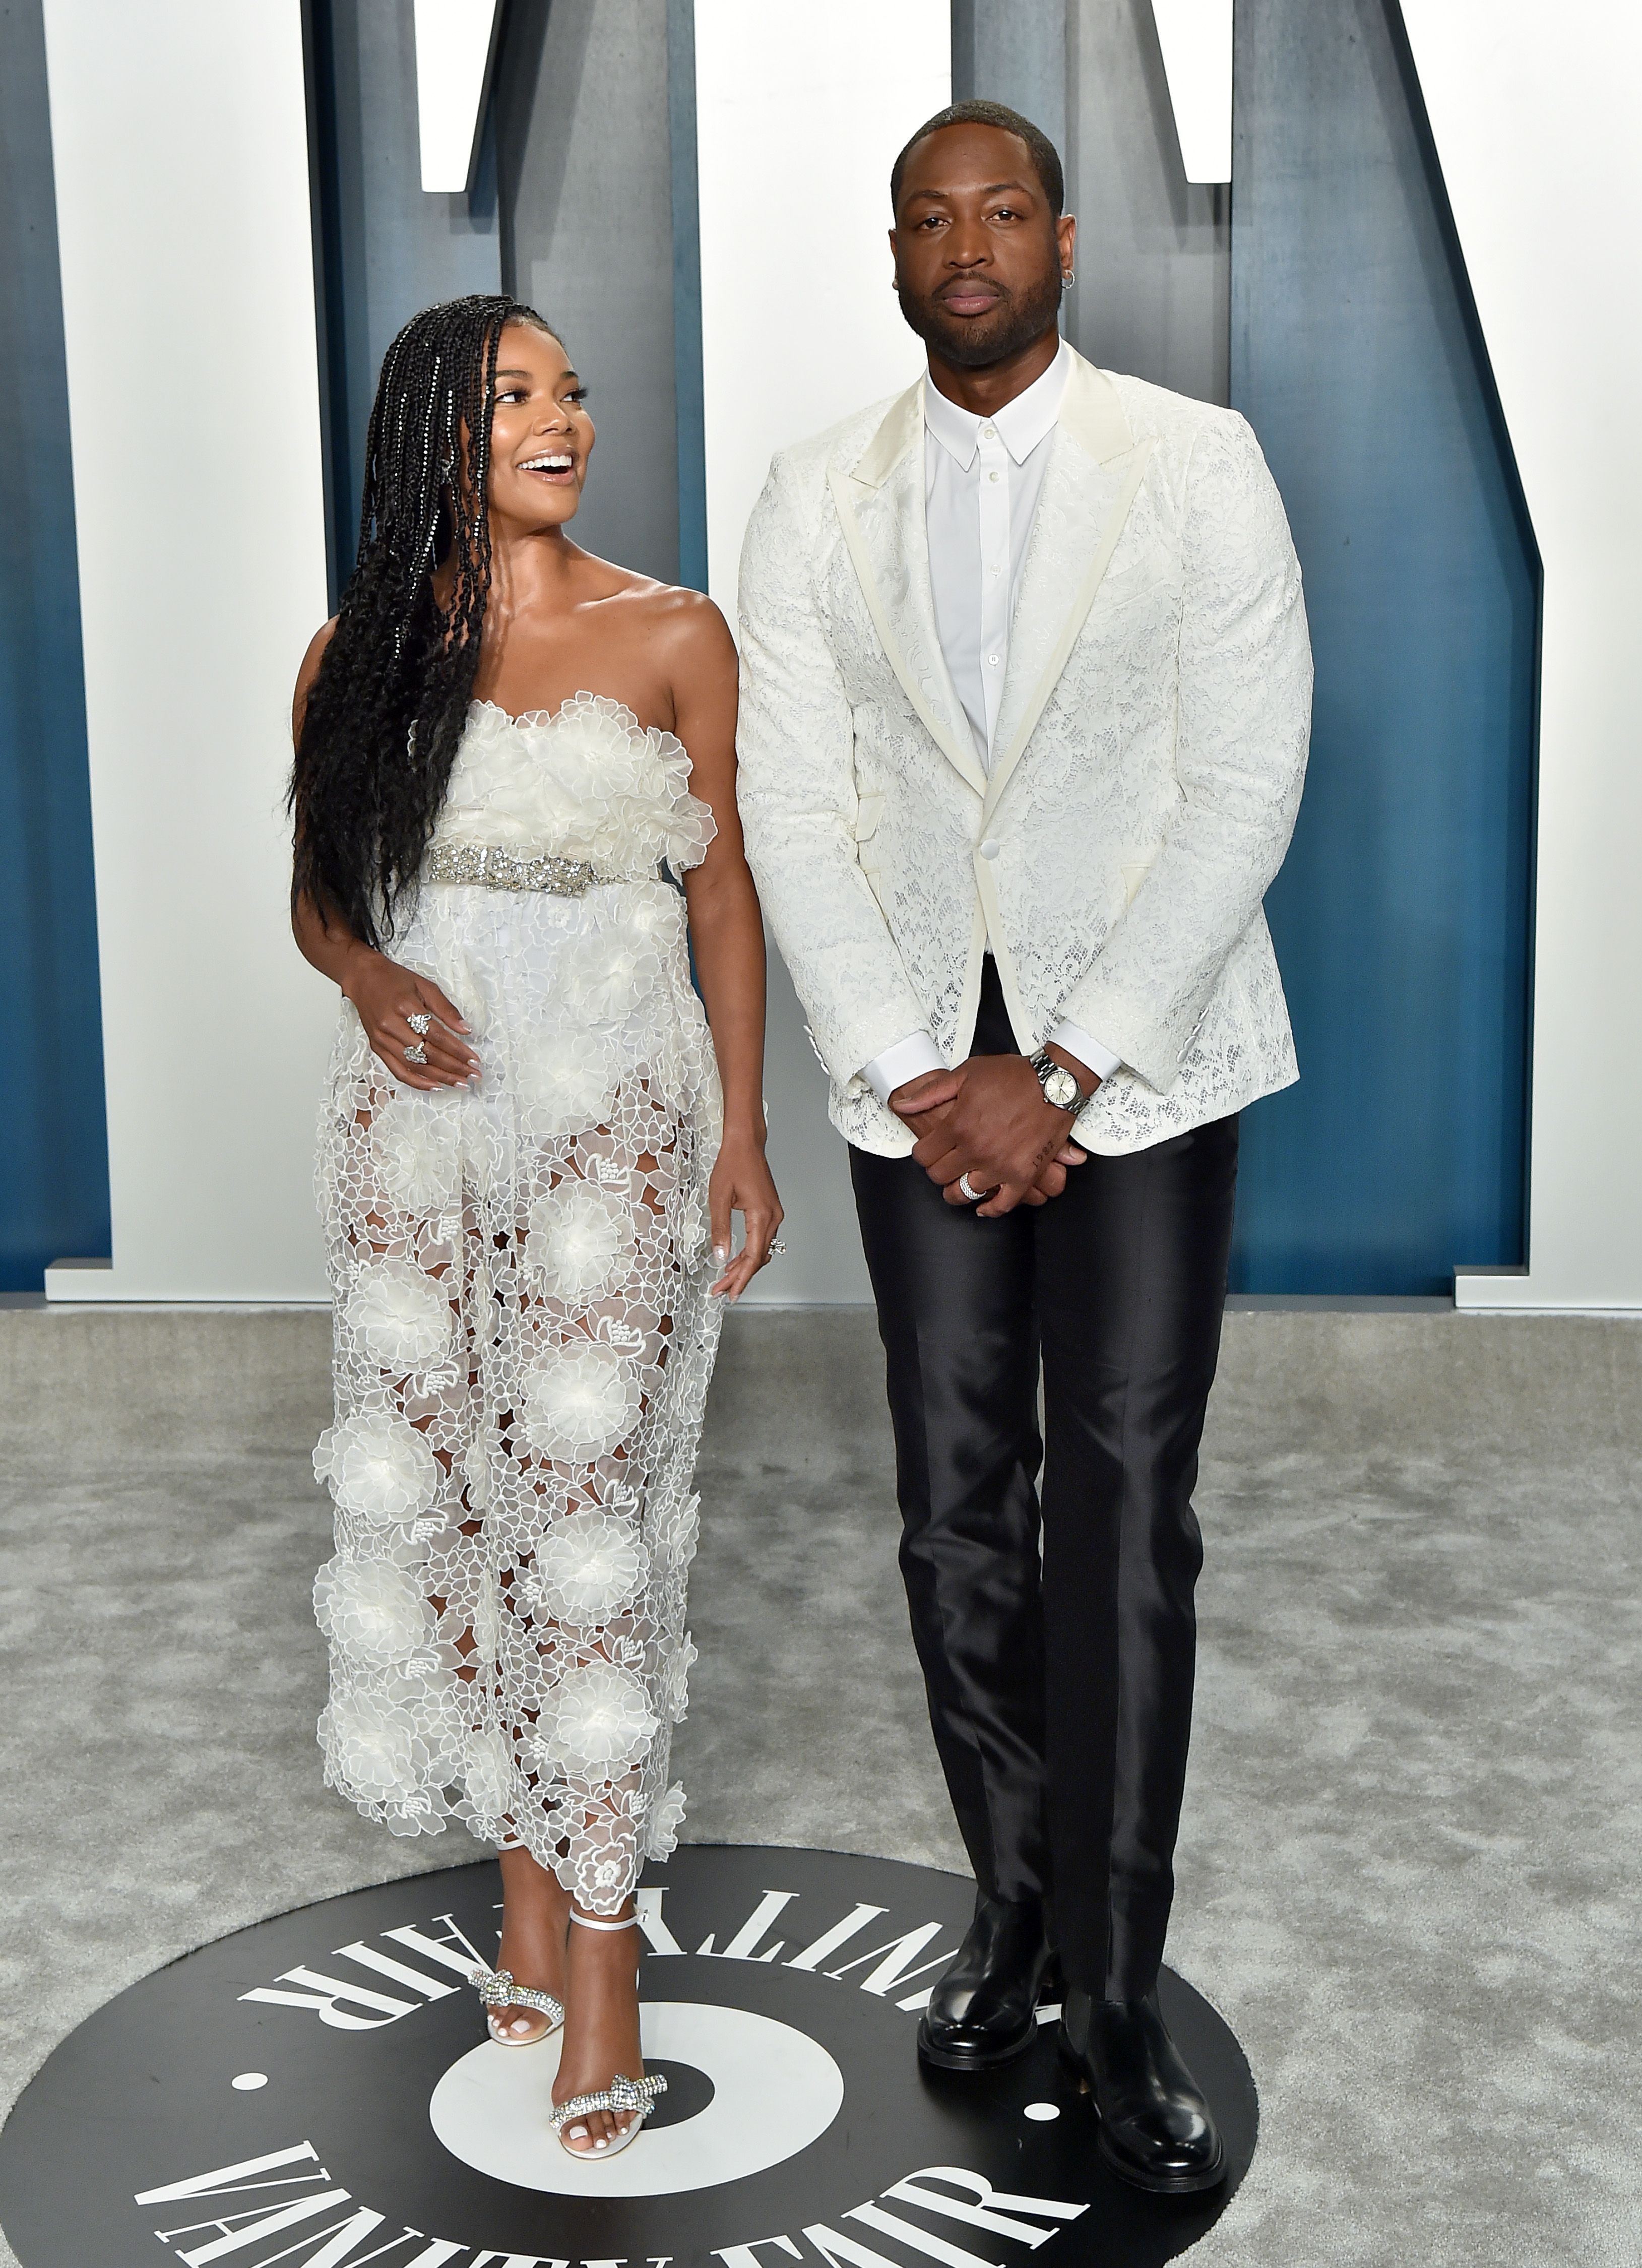 Gabrielle Union and Dwyane Wade during the 2020 Vanity Fair Oscar Party hosted by Radhika Jones at Wallis Annenberg Center for the Performing Arts on February 09, 2020 in Beverly Hills, California. | Source: Getty Images